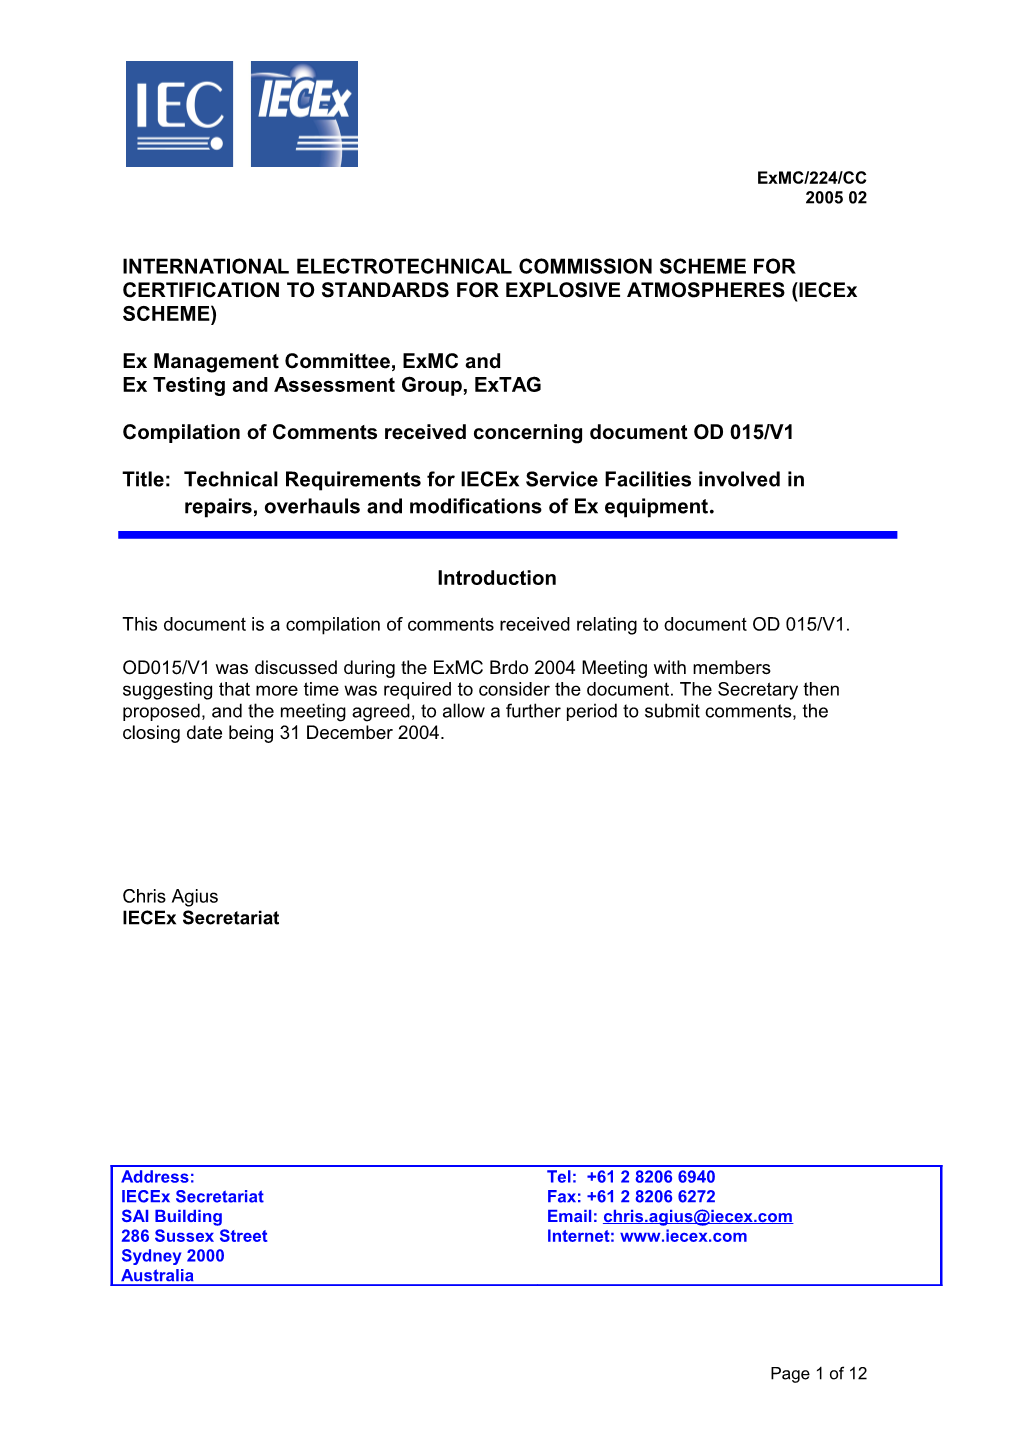 International Electrotechnical Commission Scheme for Certification to Standards for Explosive